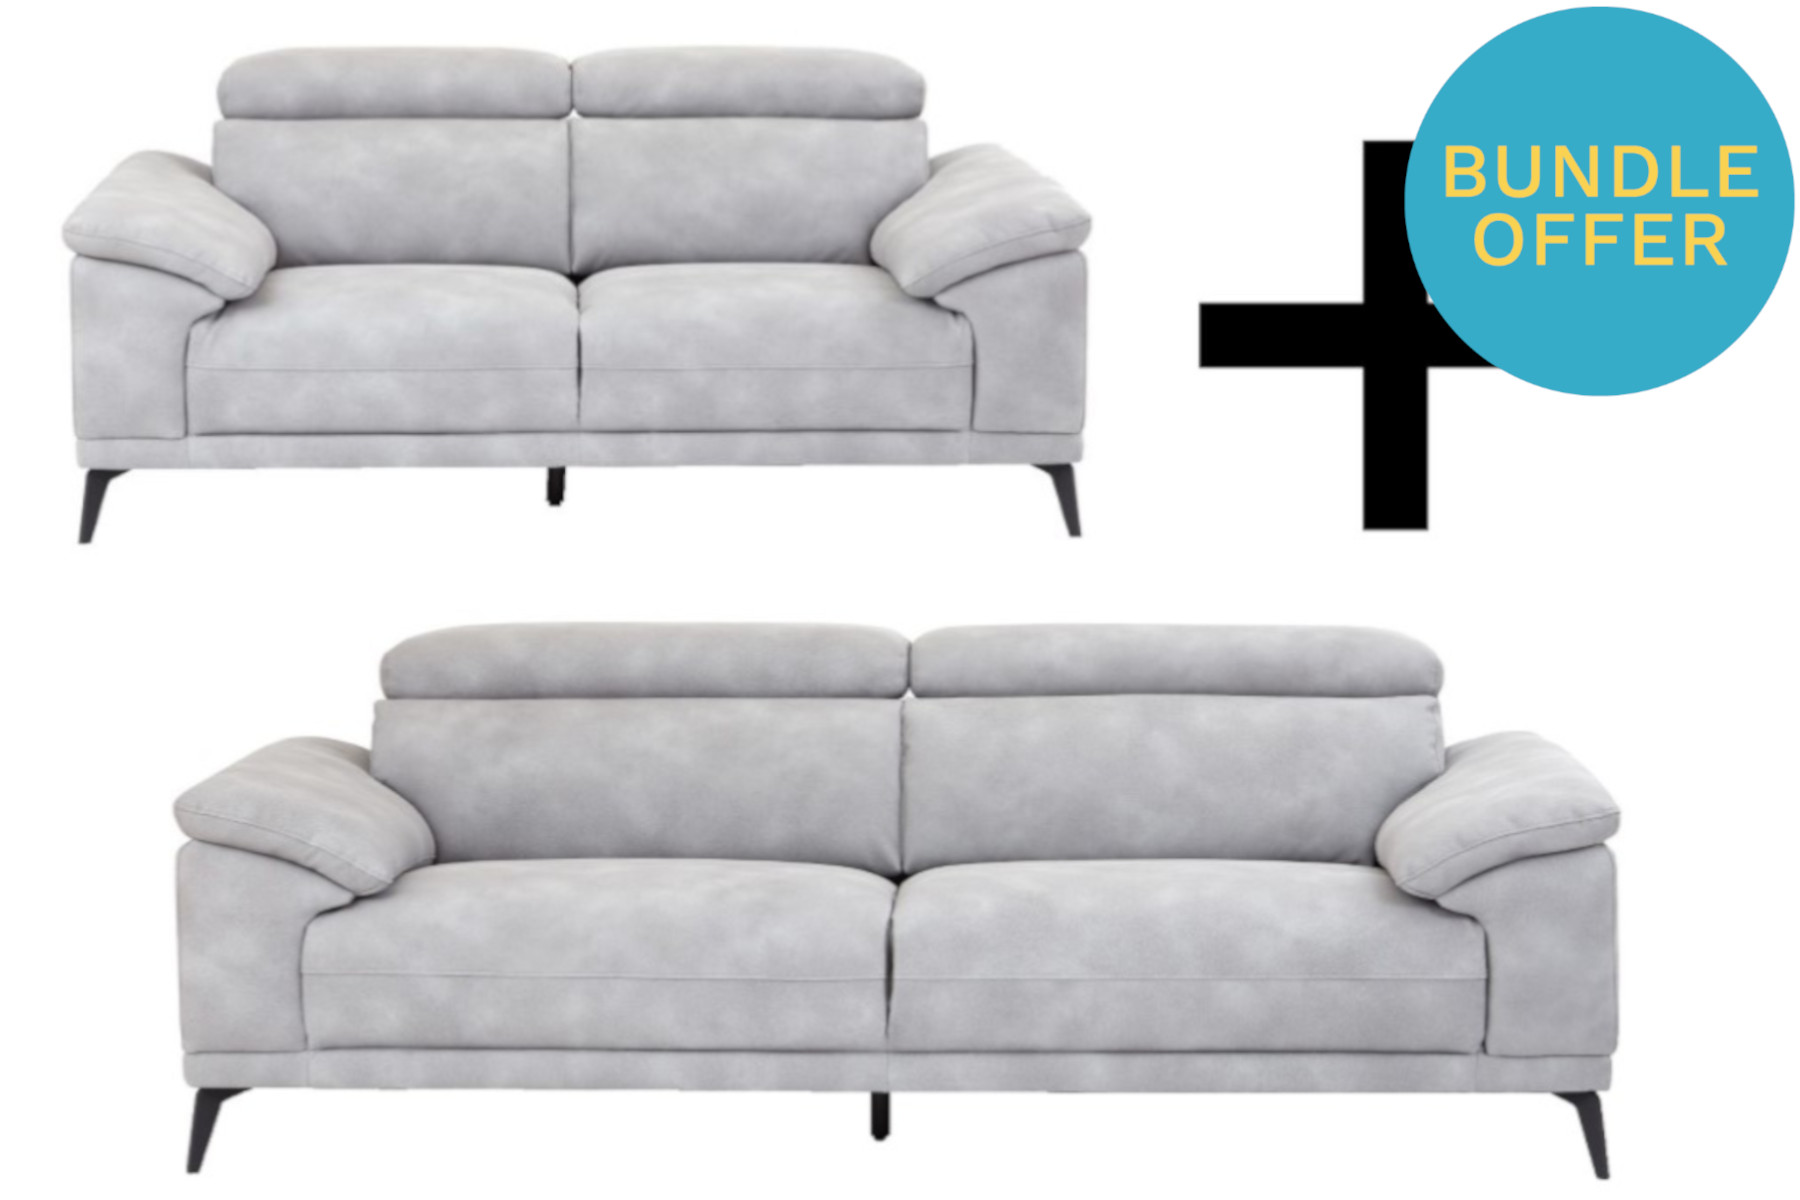 Montero 3 Seater and 2 Seater Bundle - Grey